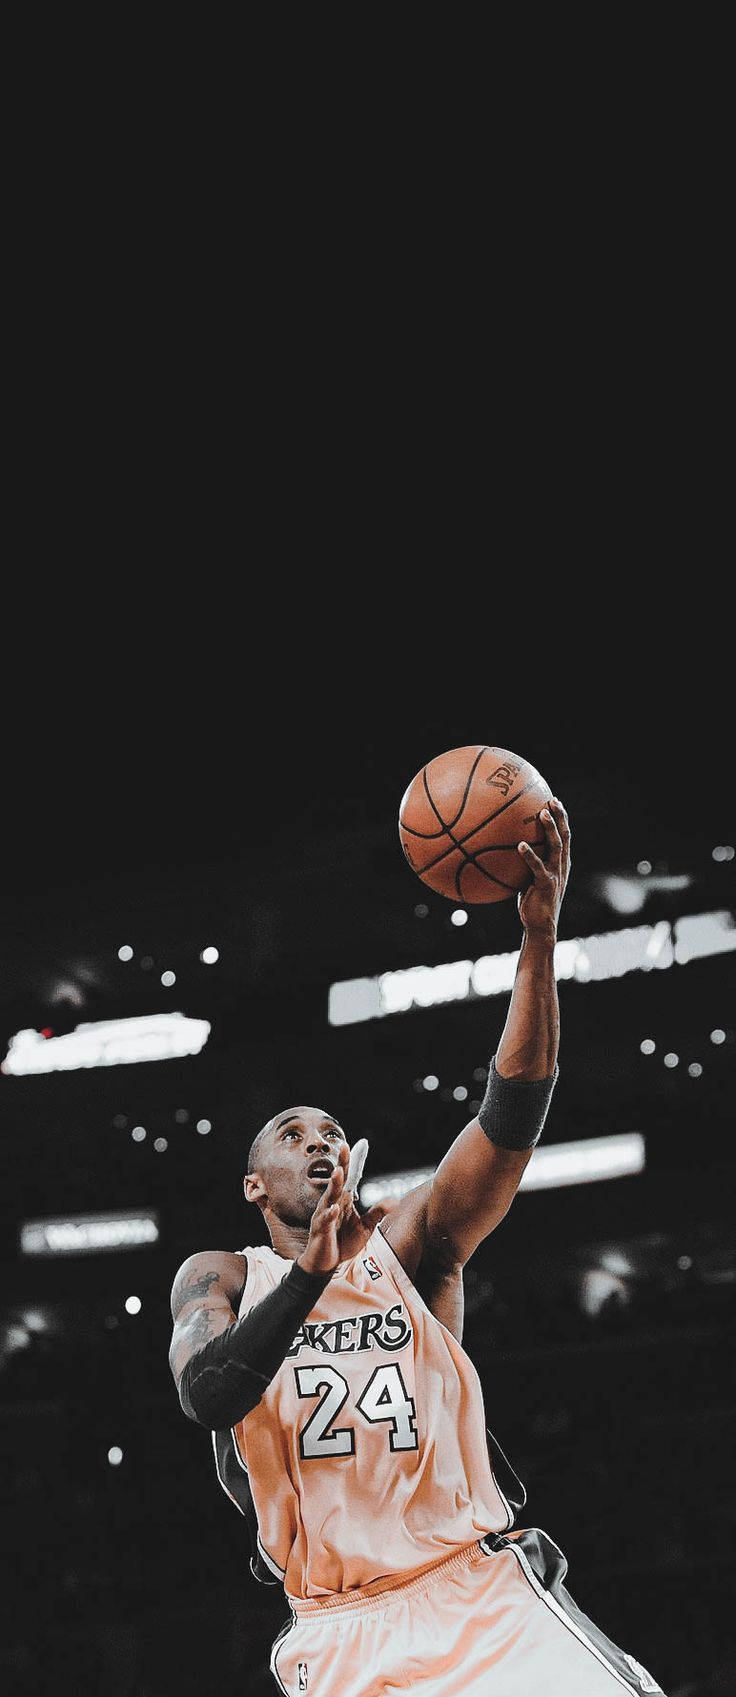 Aesthetic Kobe Bryant About To Shoot Wallpaper